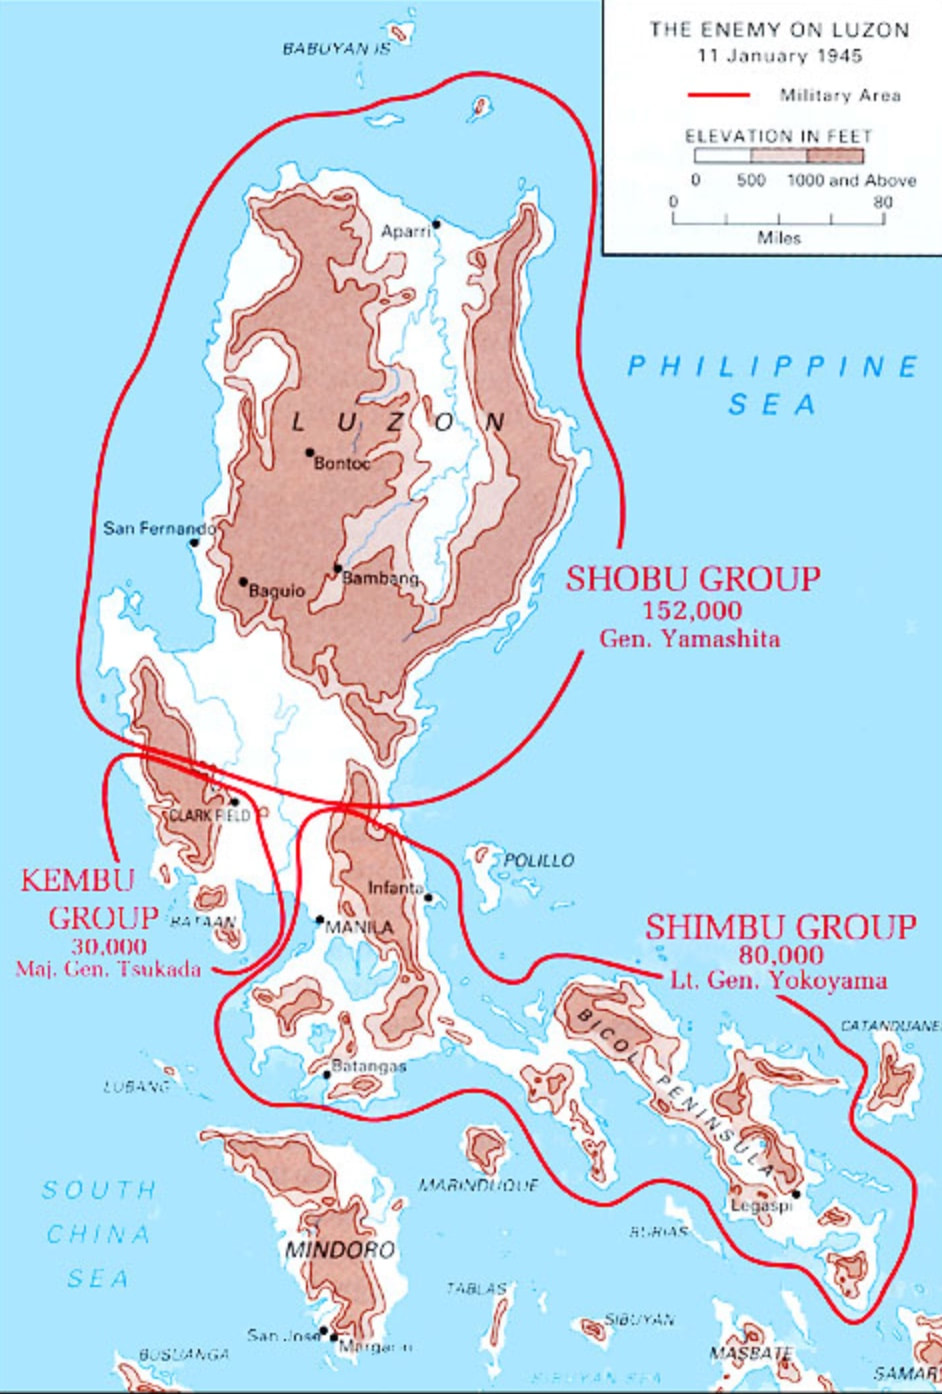 January 1945 - Enemy Forces on Luzon